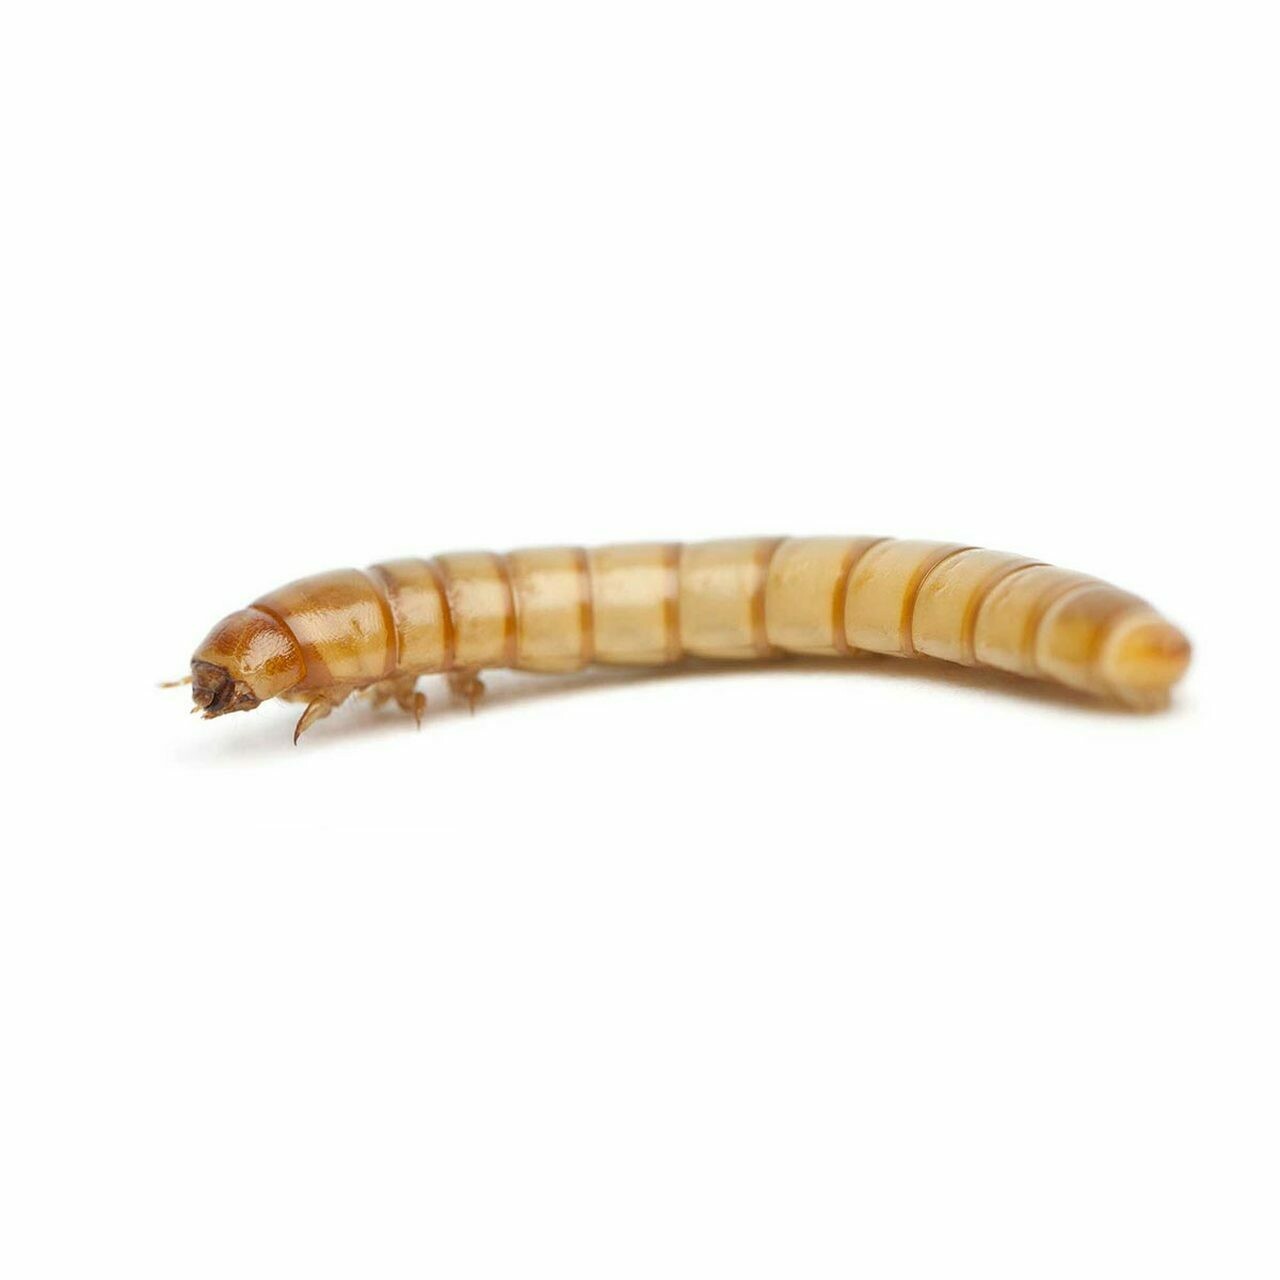 LIVE - MEALWORMS - 100